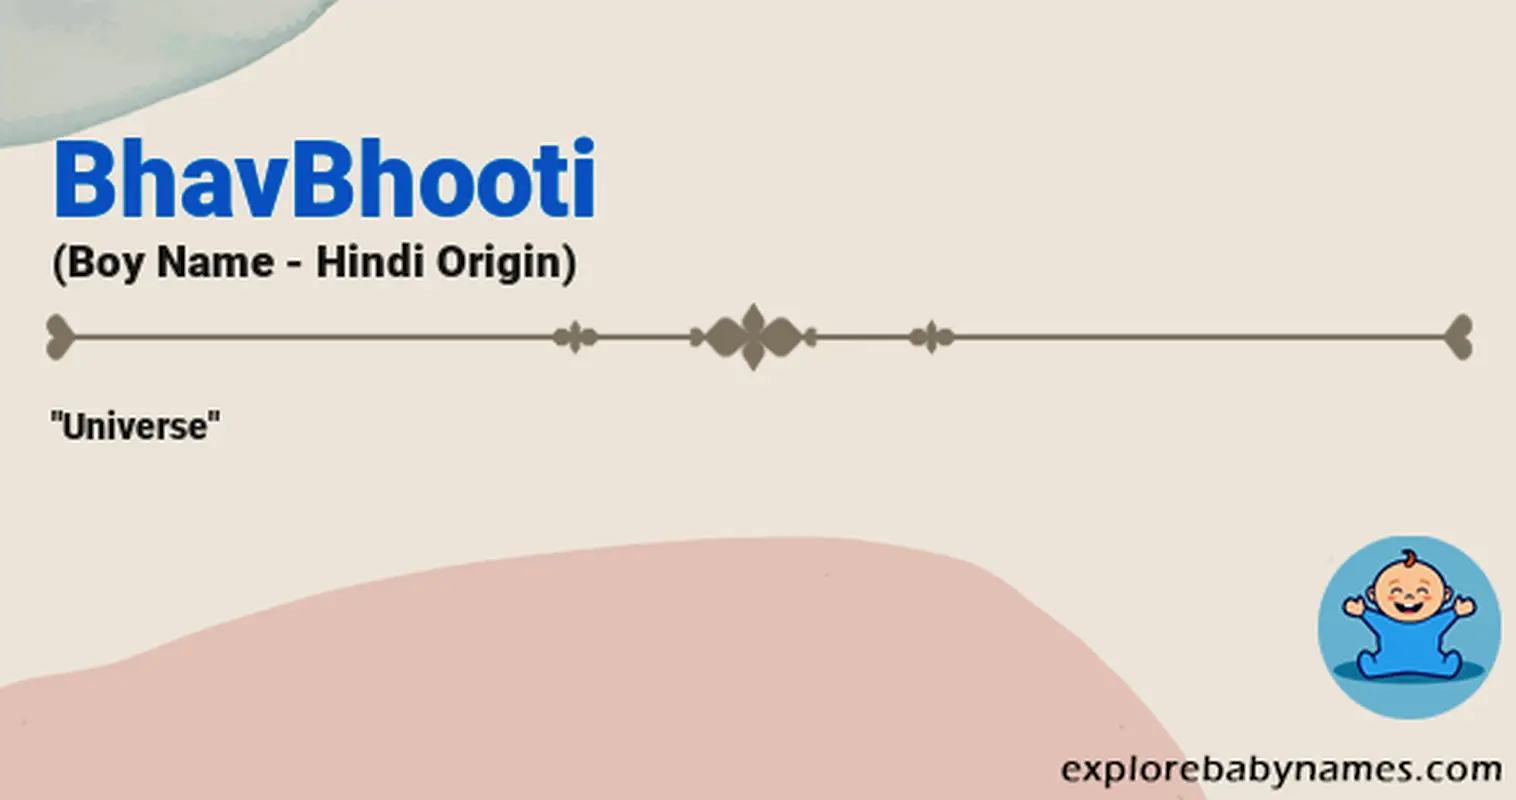 Meaning of BhavBhooti